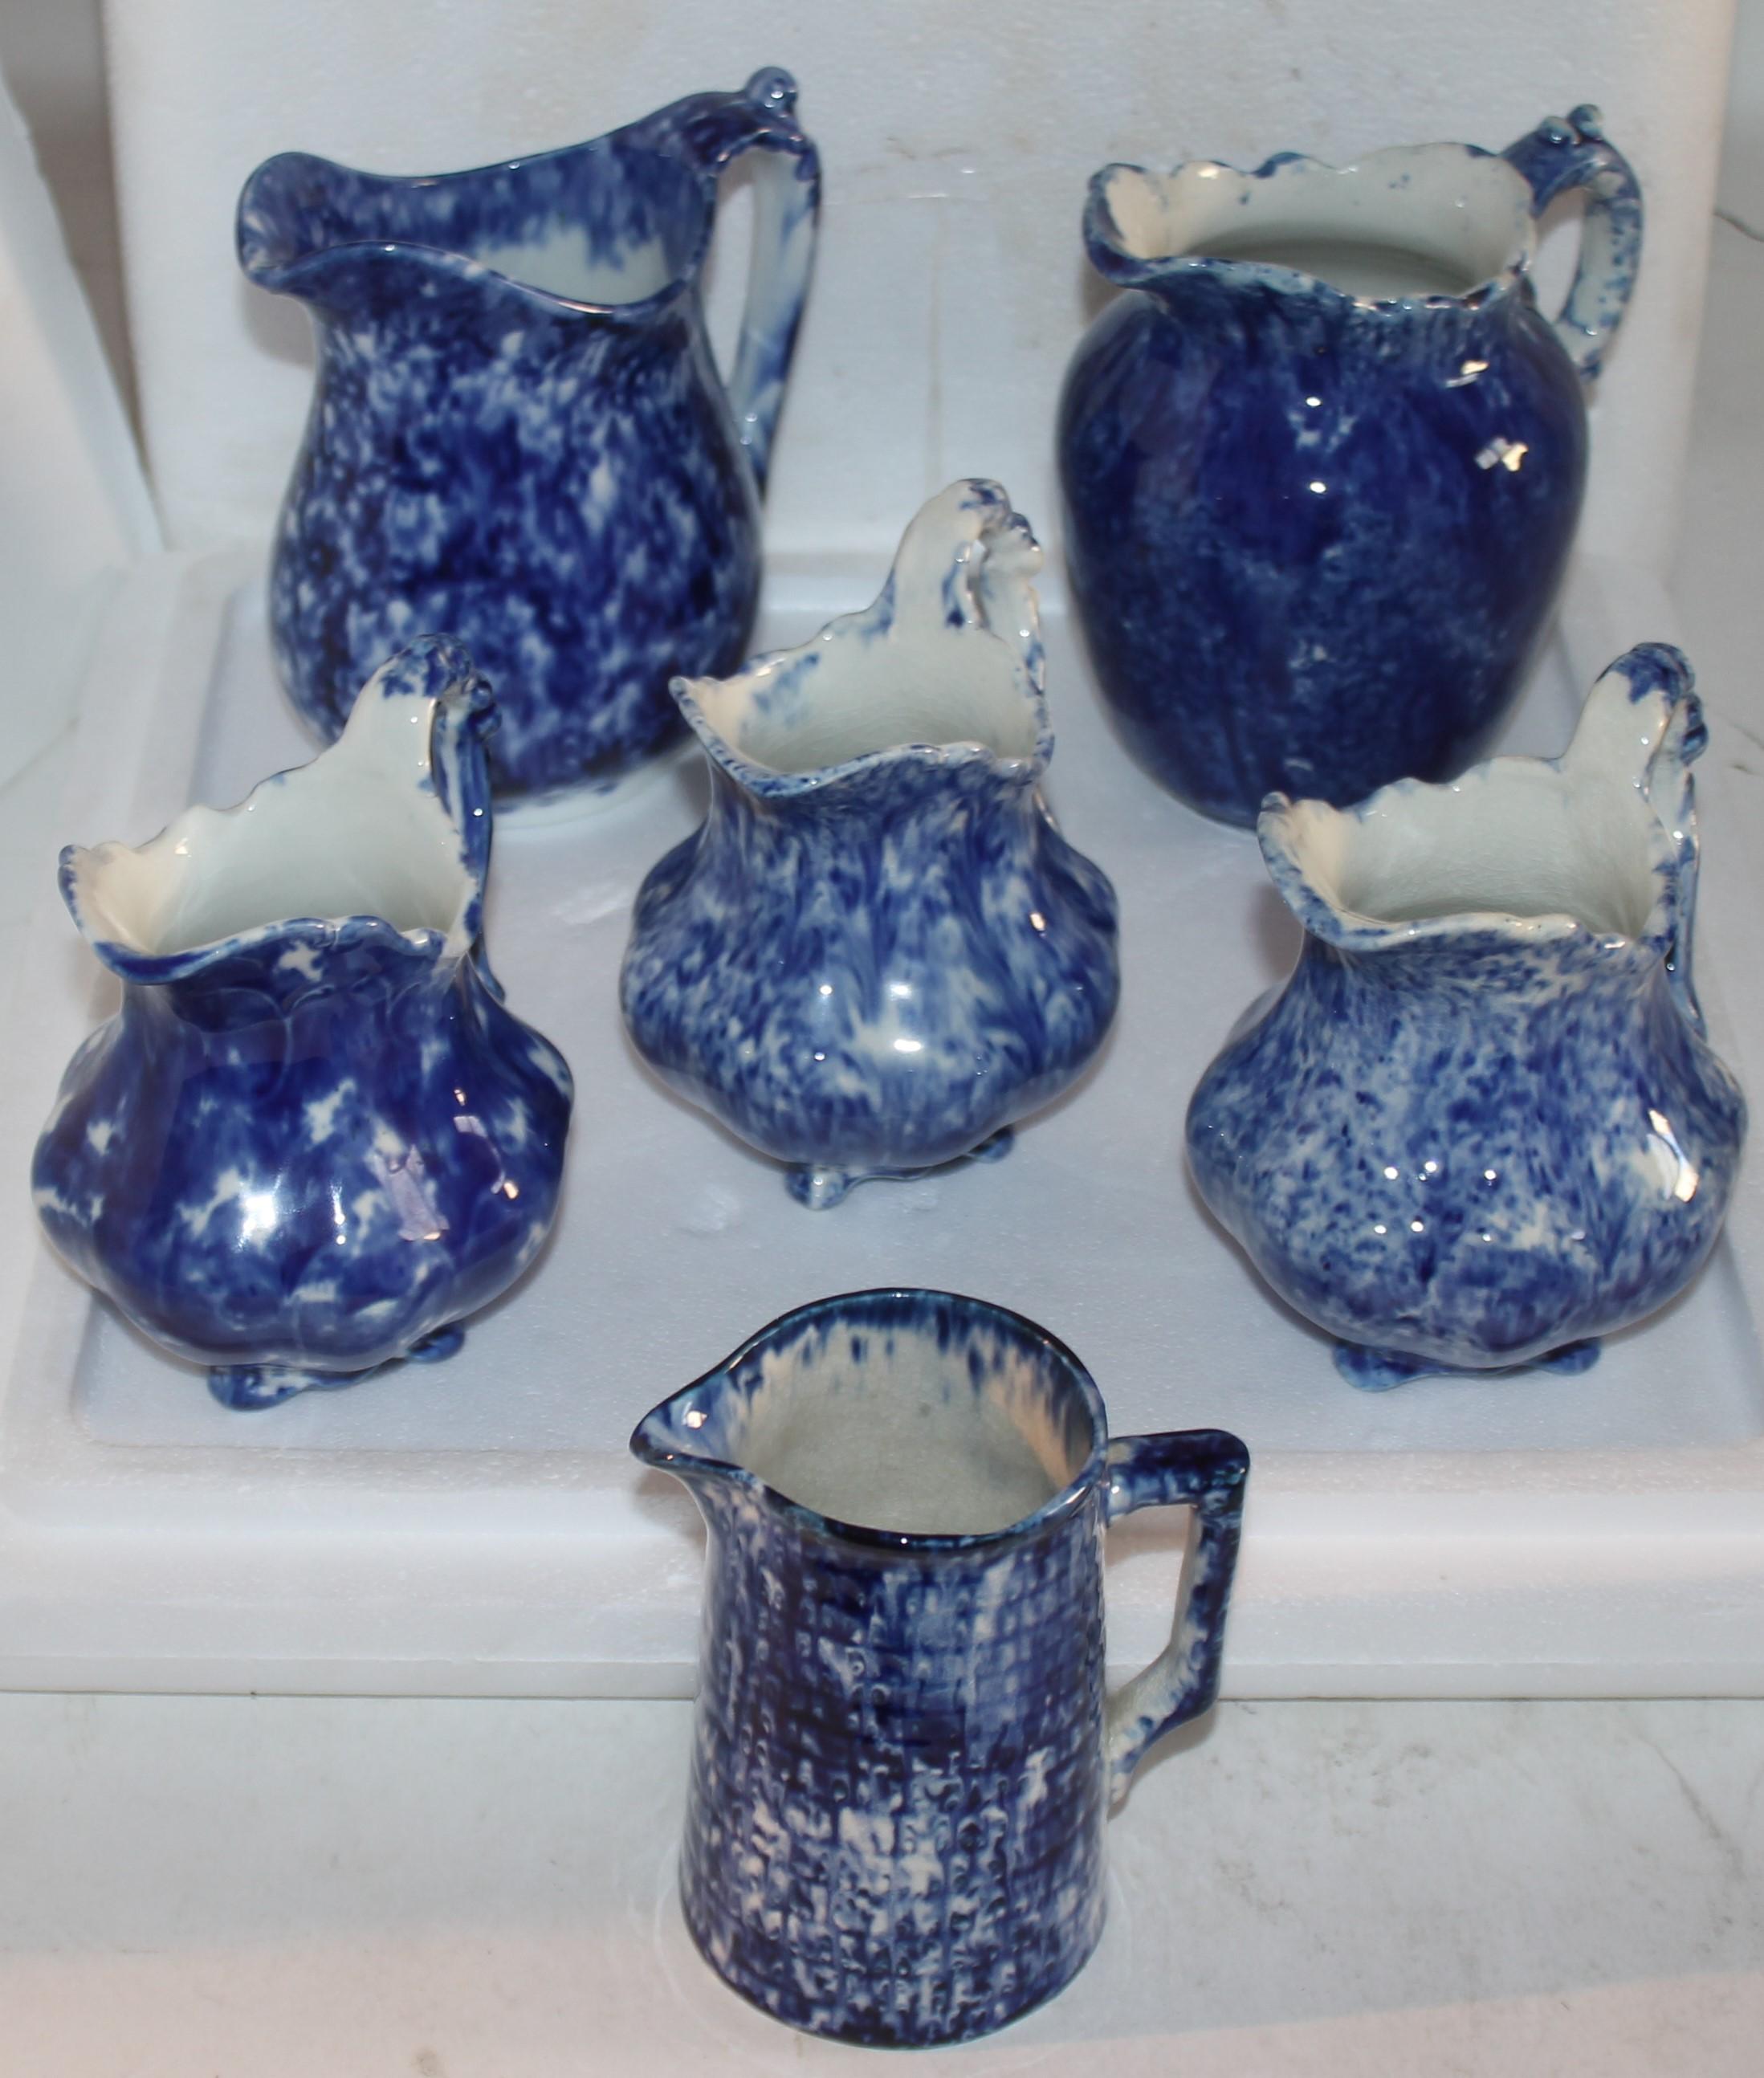 19thc sponge ware collection of six pieces of sponge ware cream or milk pitchers.
All in good condition.
Orate pitchers - 4.5 x 4.5 x4.5
Slender pitcher 4 deep x 4.5 tall x 2.5 wide
Large ornate 5.5 tall x deep x 3 wide
large creamer 5.75 W x